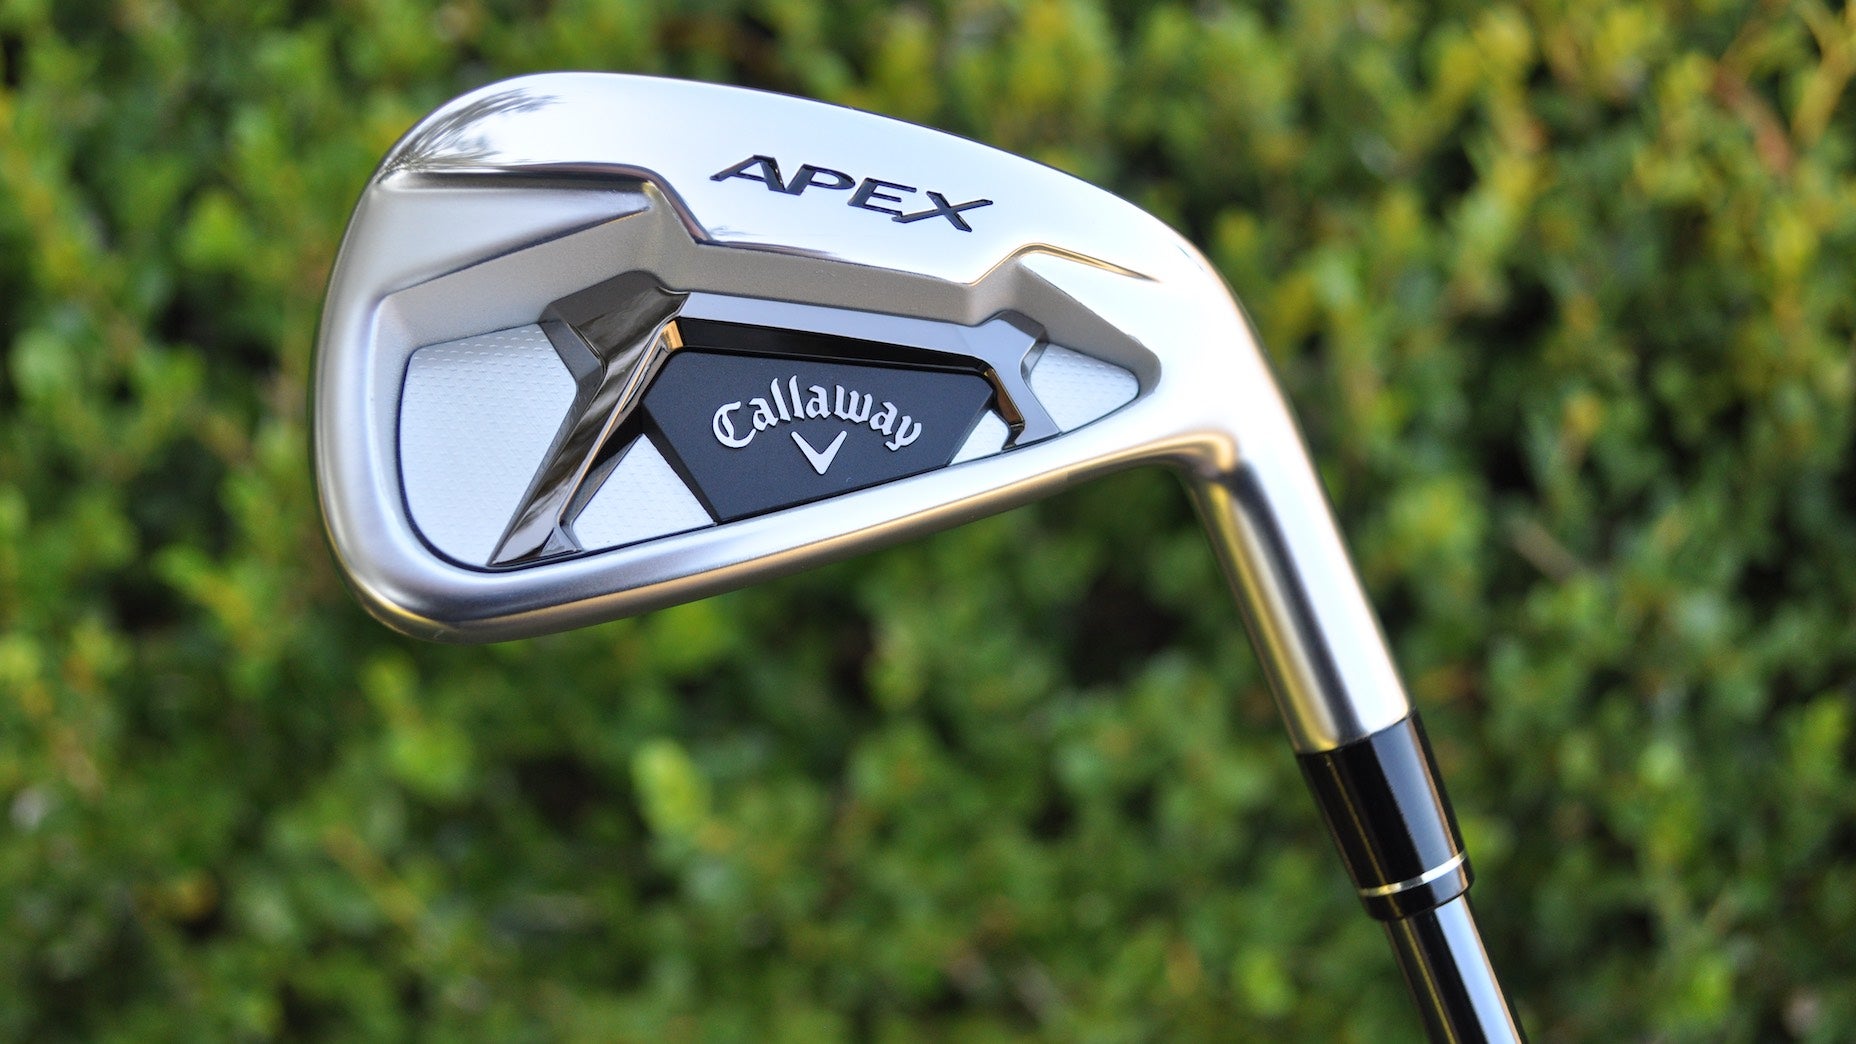 Callaway's Apex, Apex DCB and Apex Pro irons - First Look